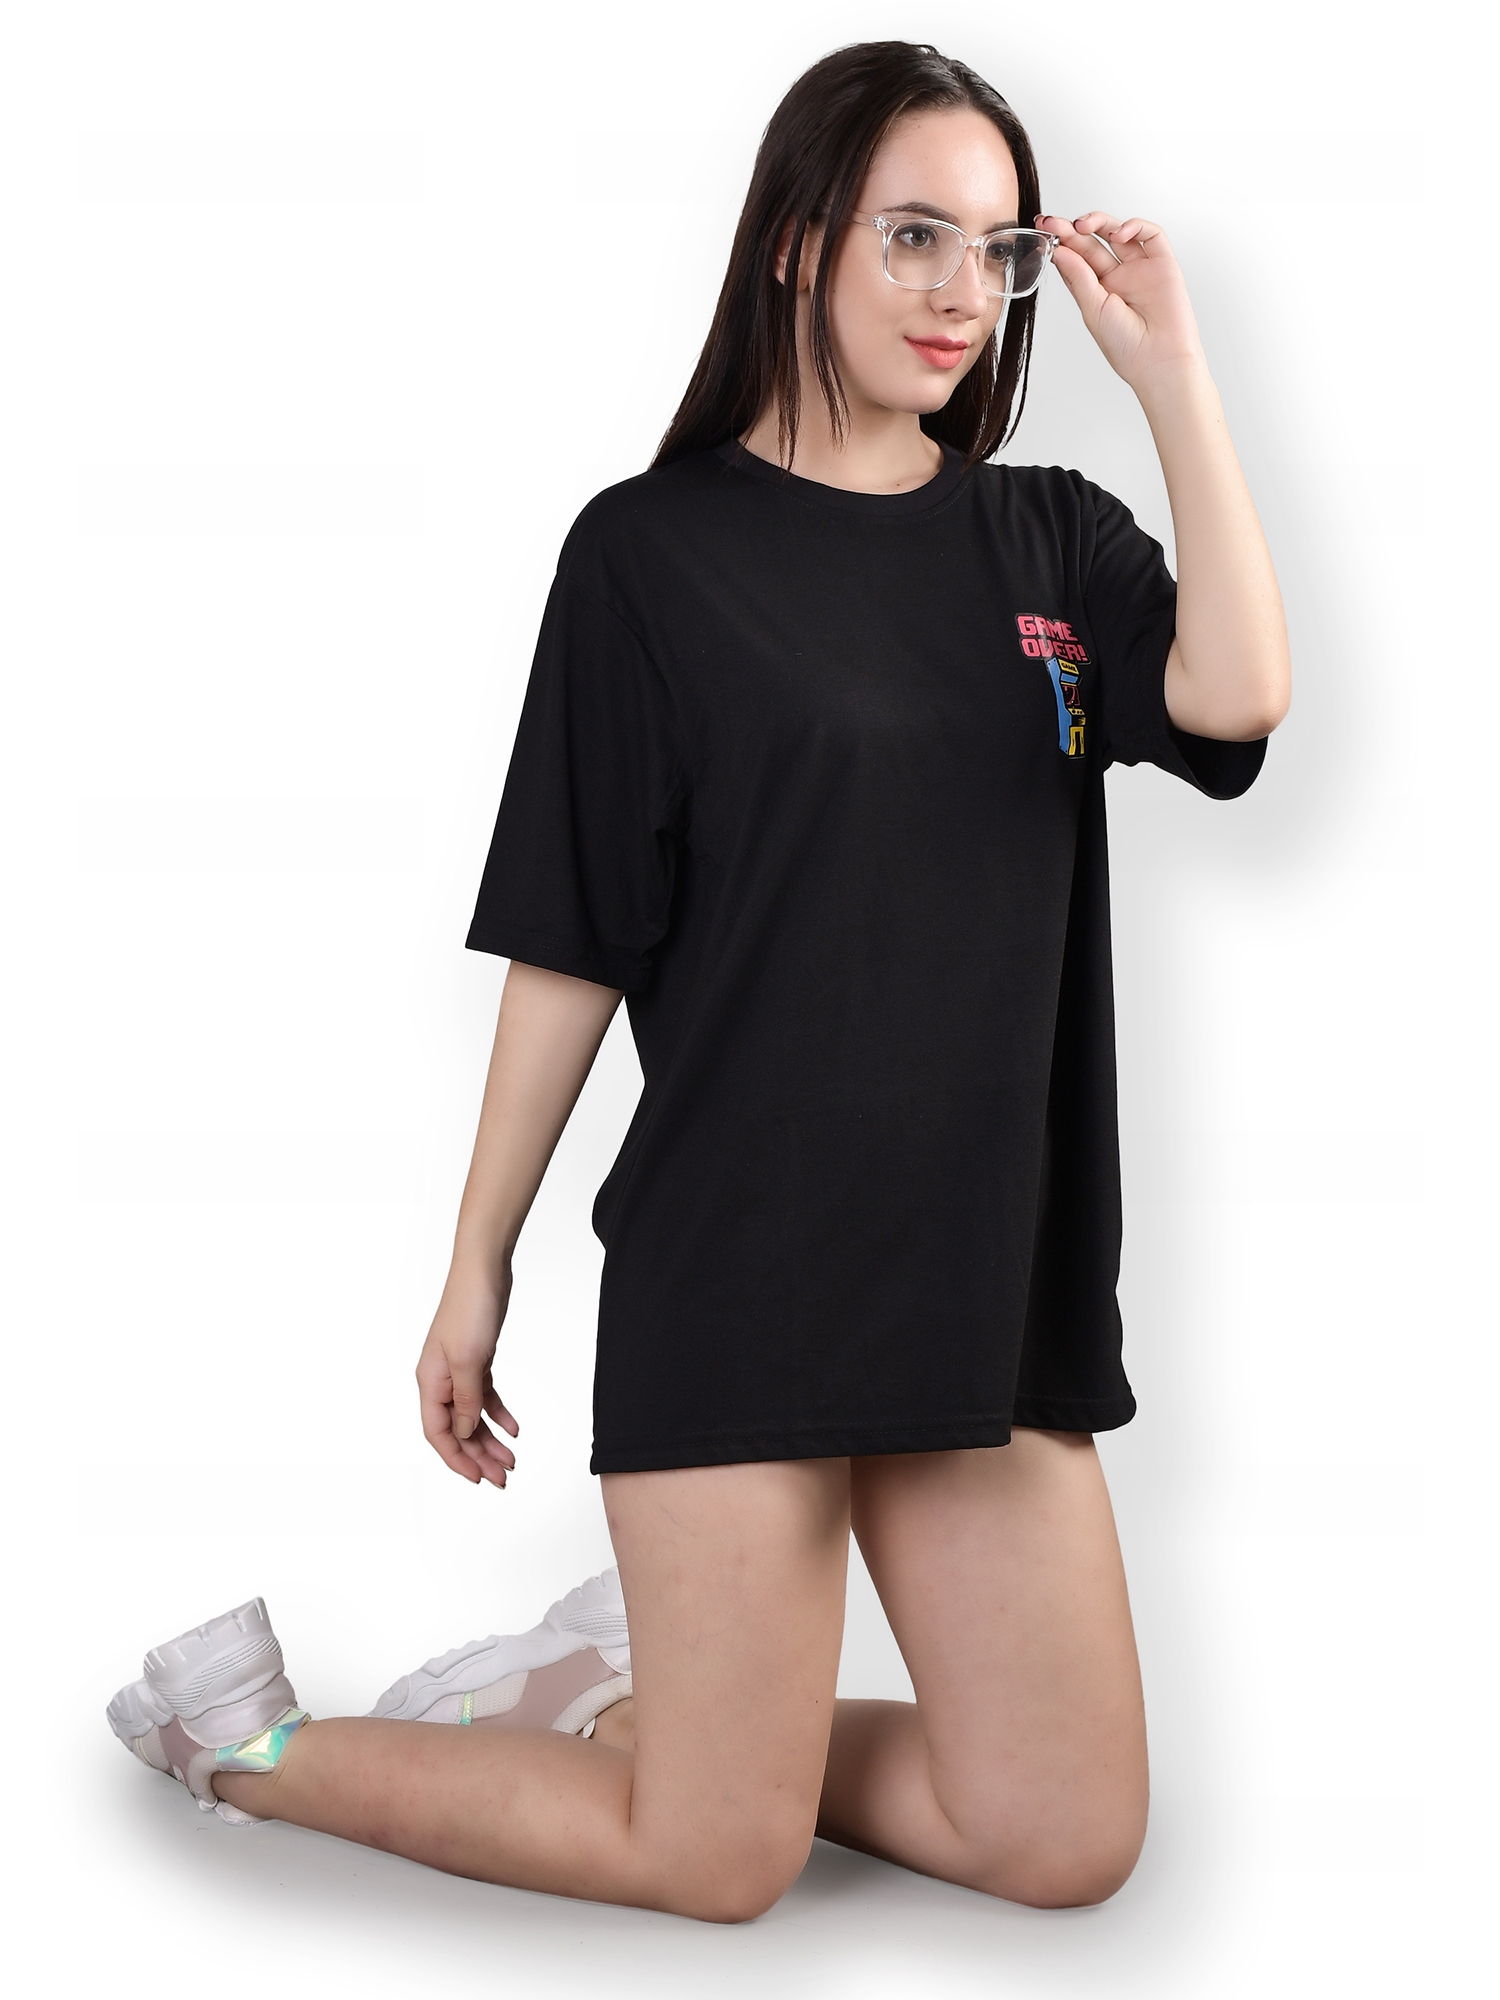 Game Over : Quirky Printed Oversized Women's Tees In Black Color